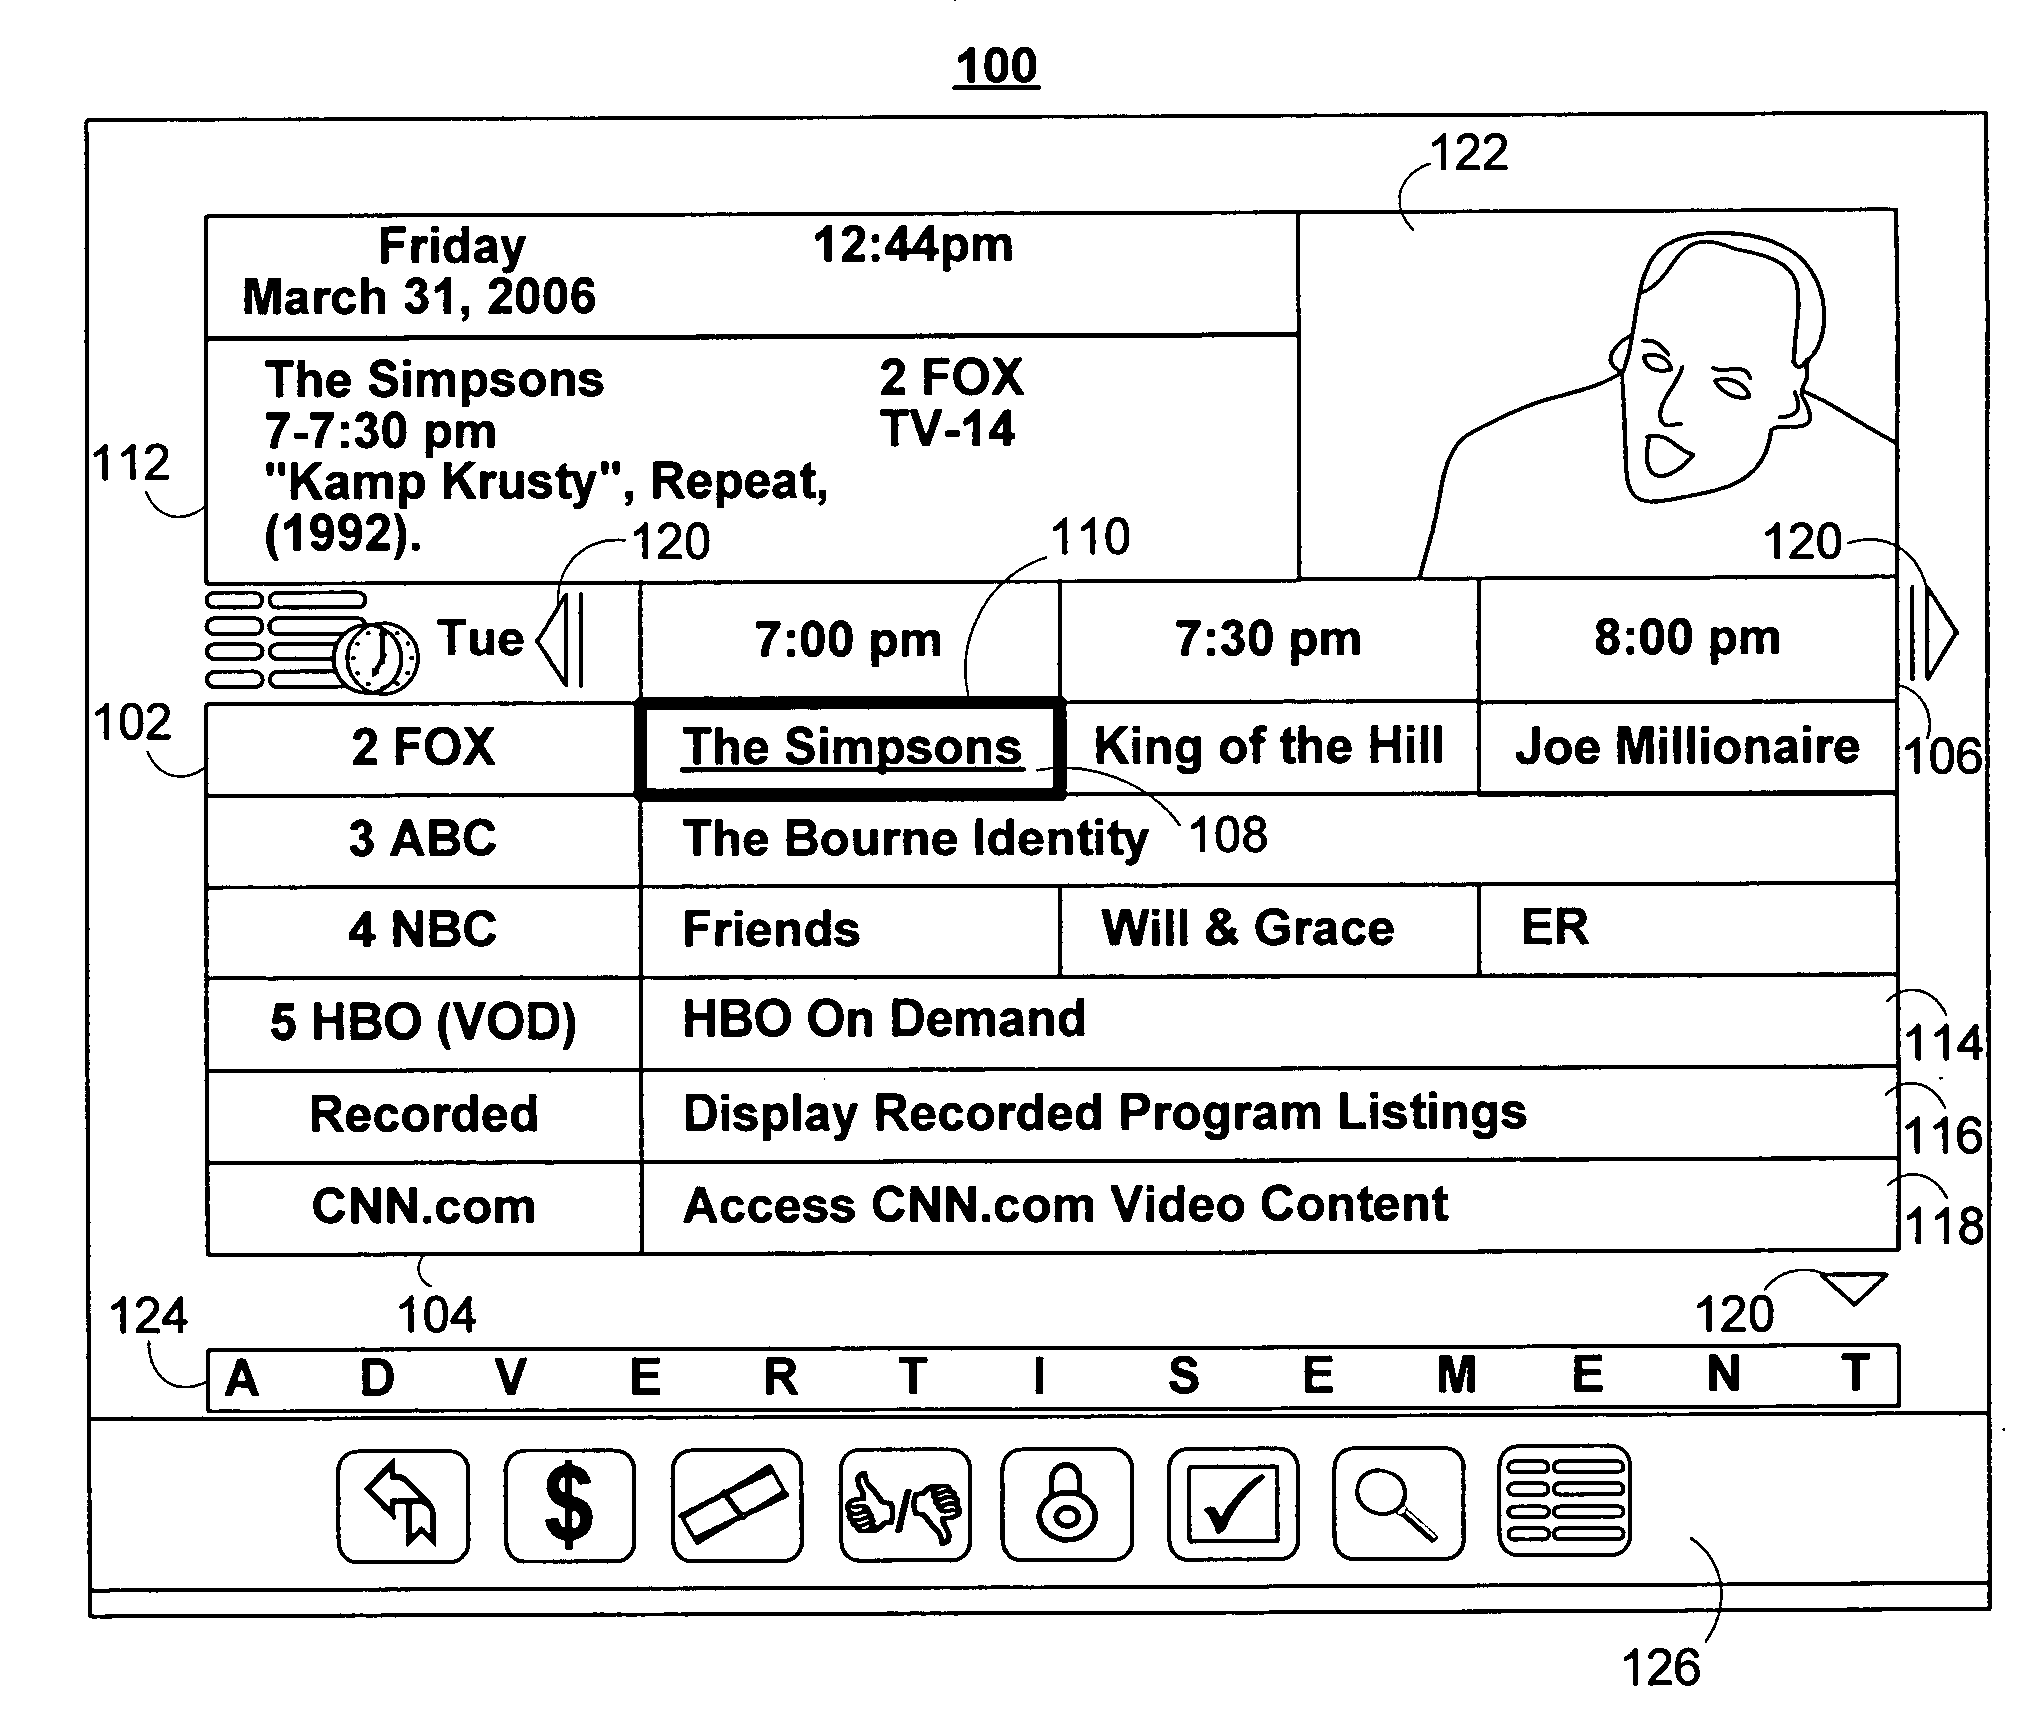 Systems and methods for providing remote access to interactive media guidance applications